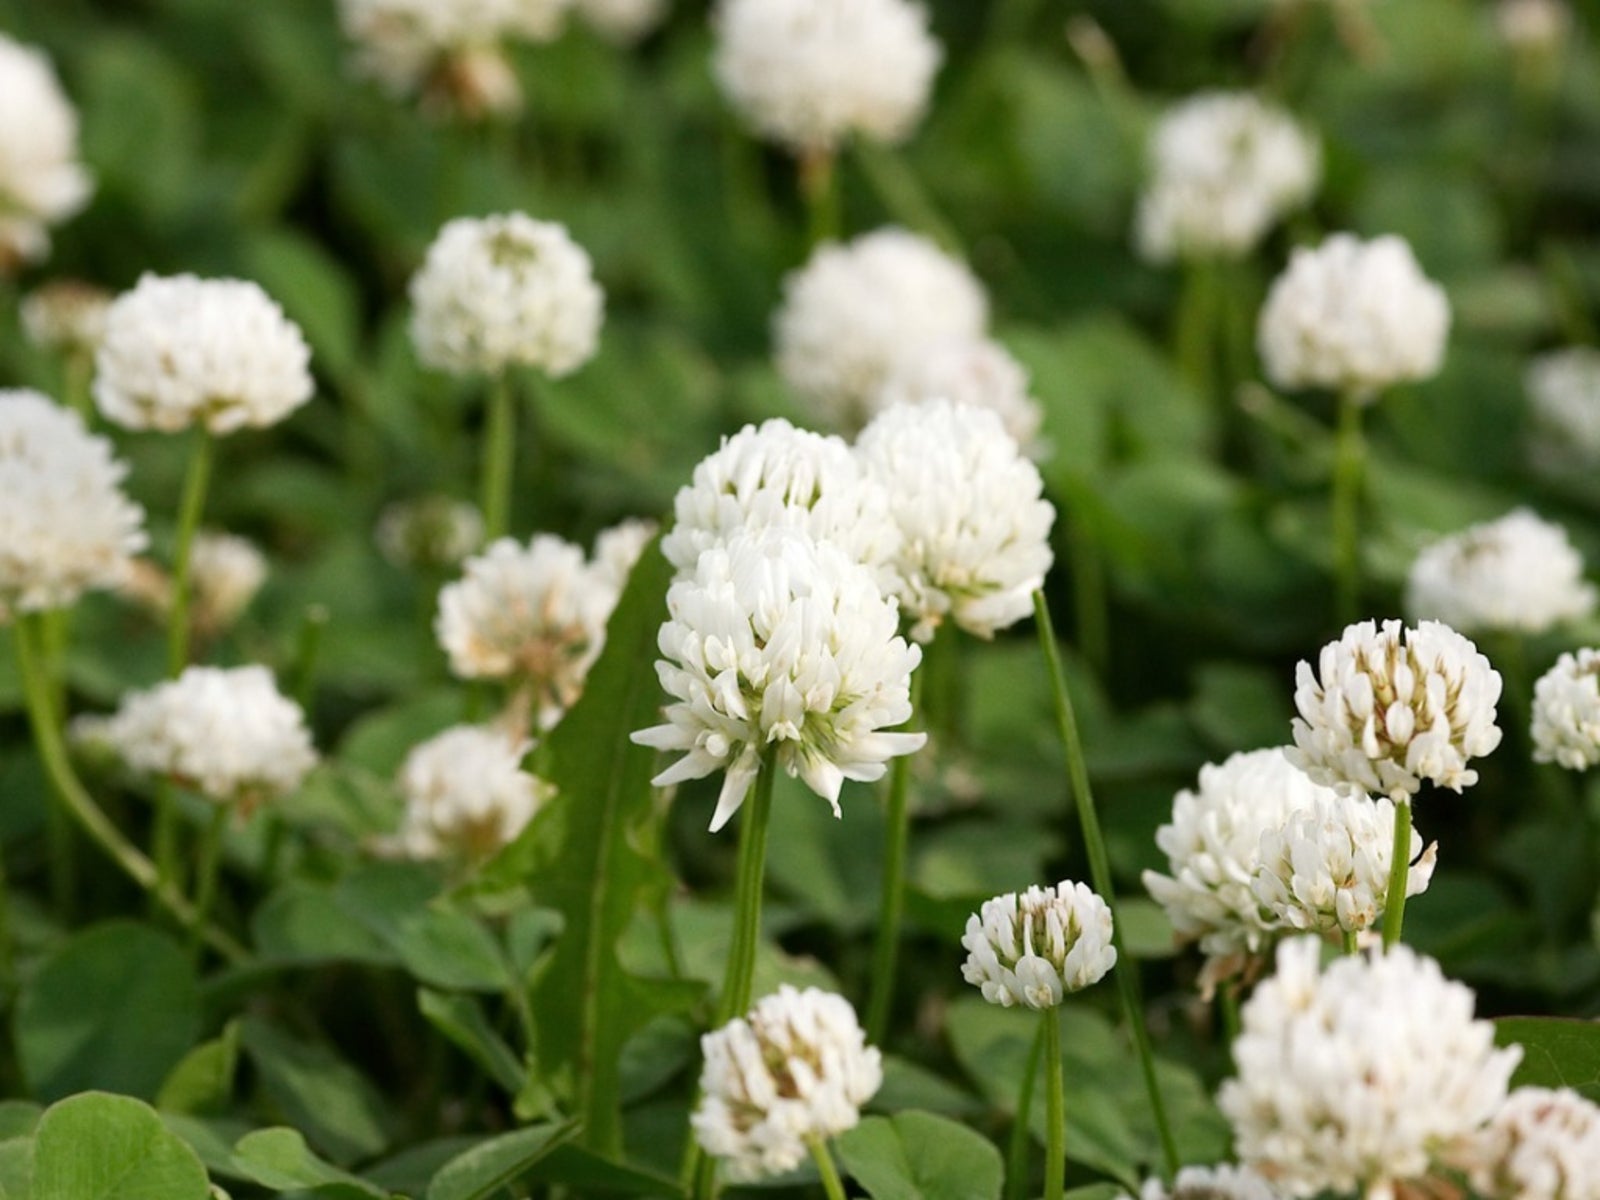 Controlling White Clover: How To Get Rid Of White Clover